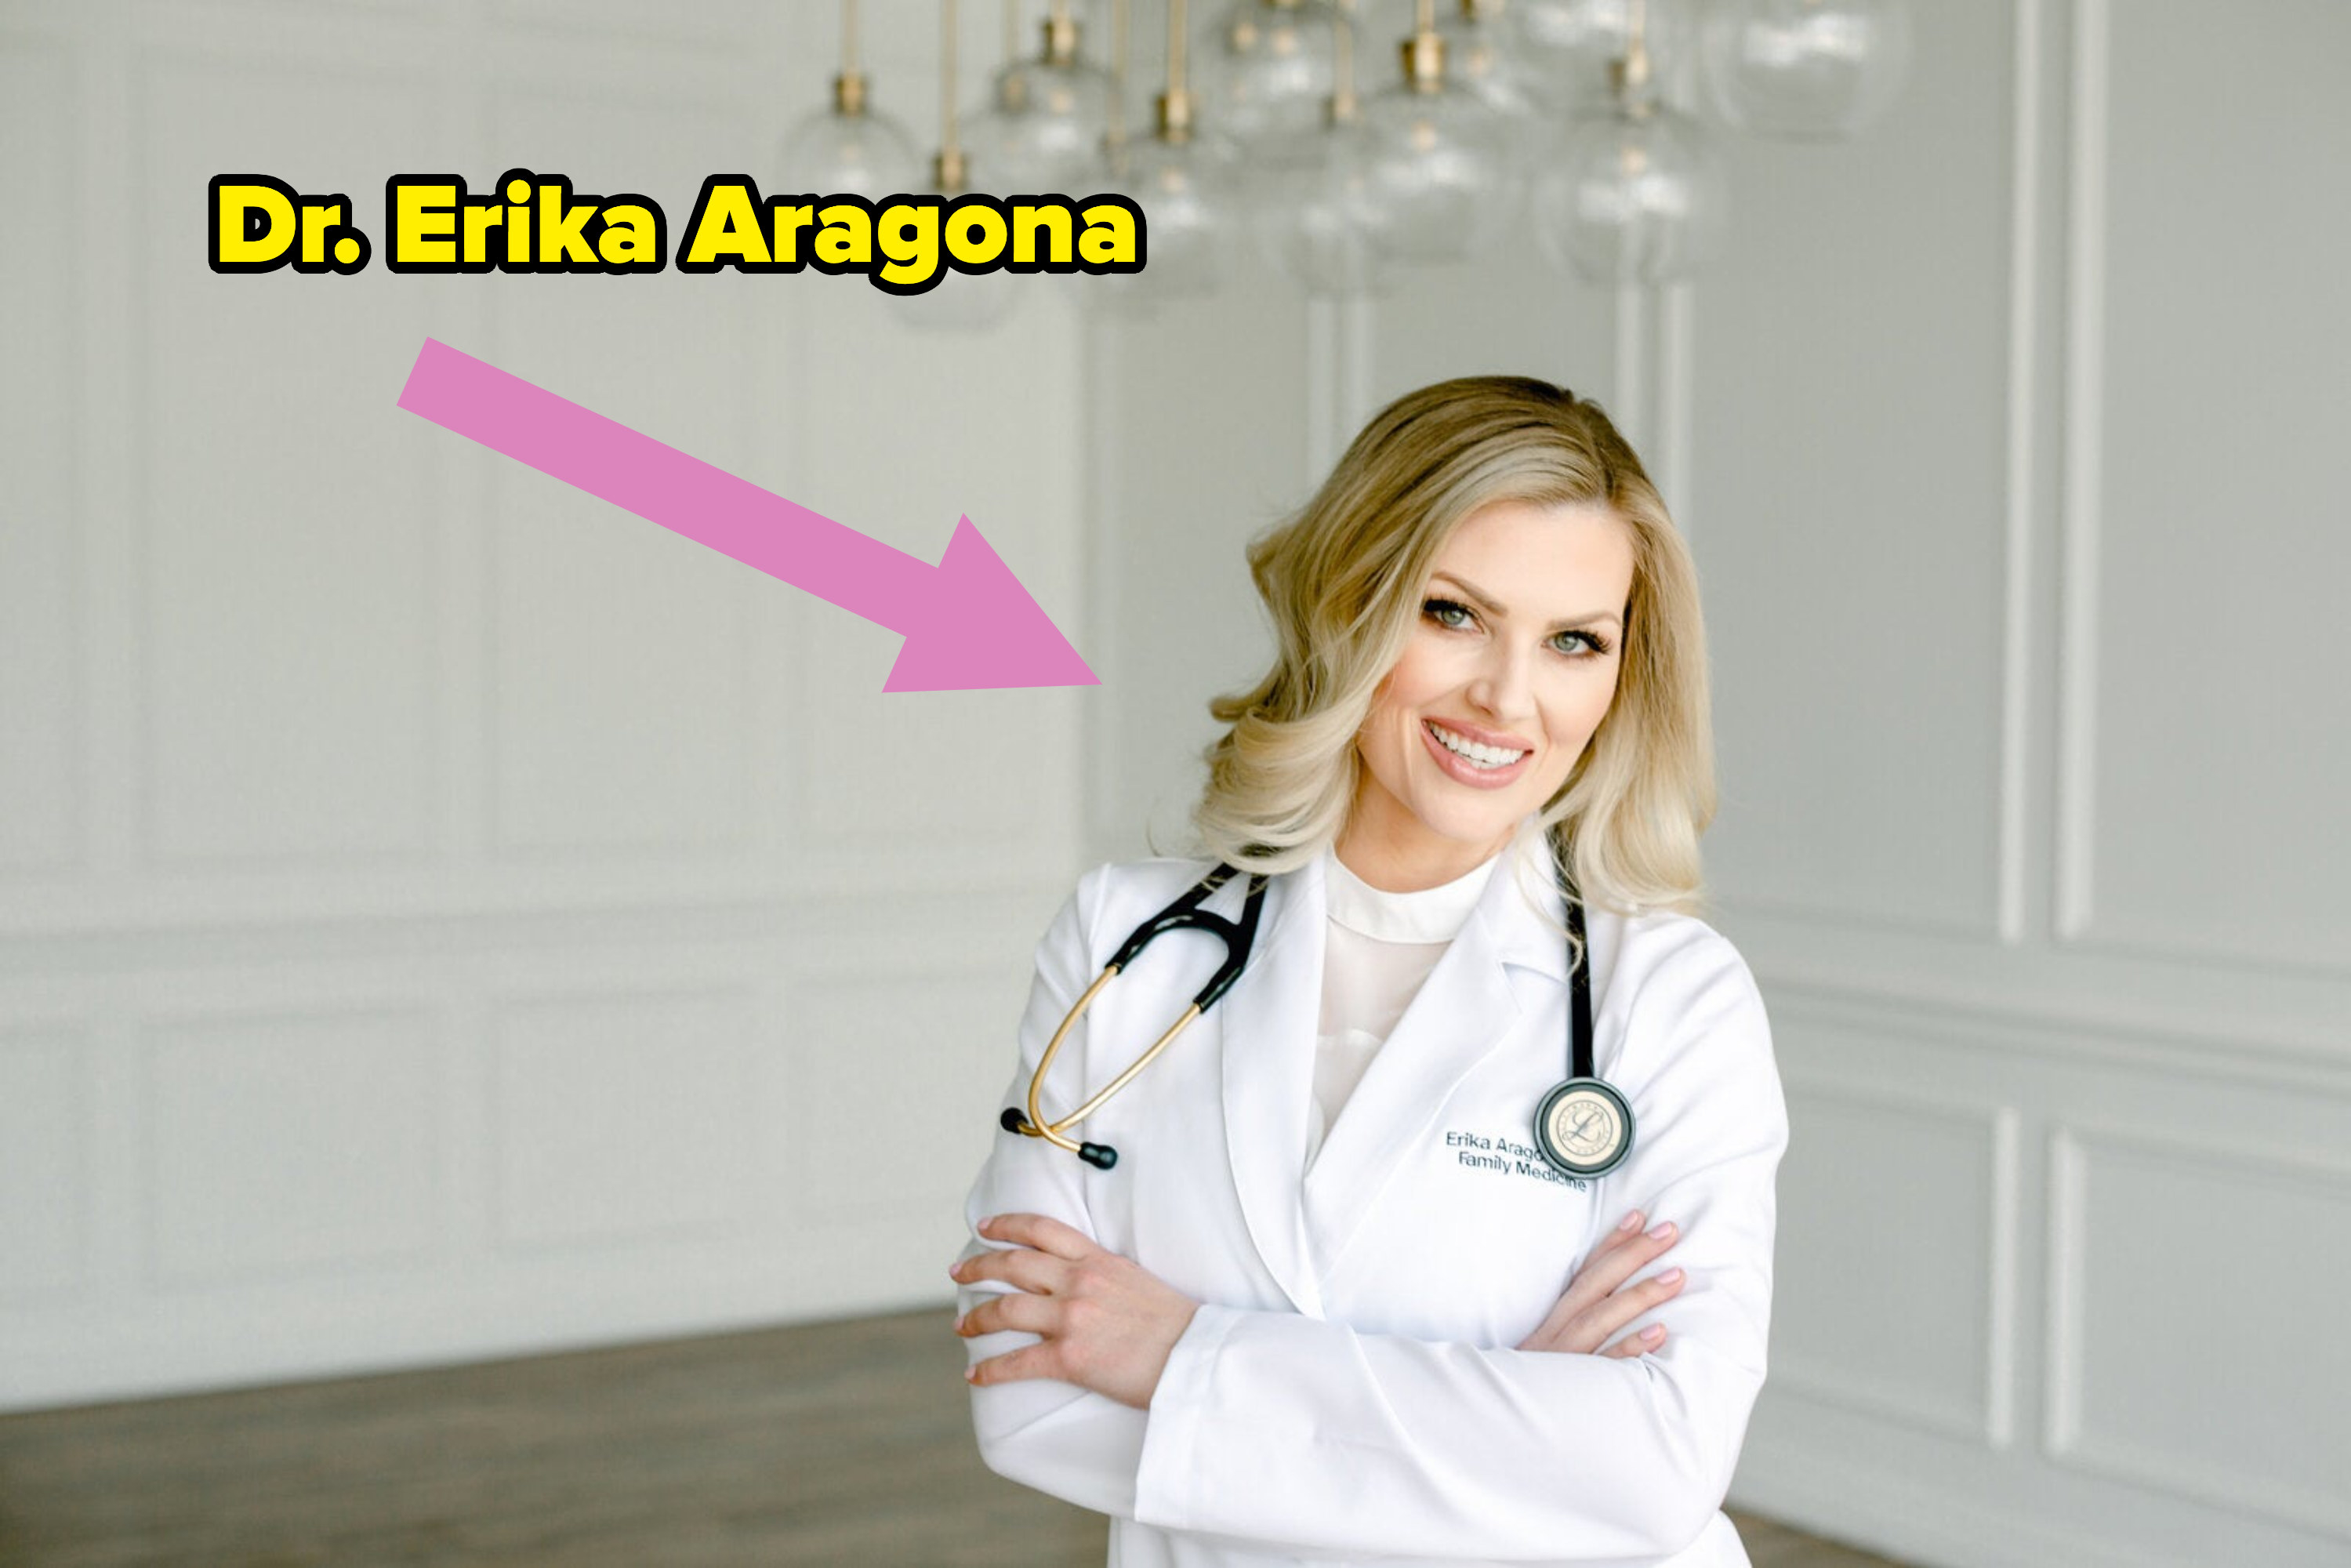 Dr. Erika in an empty room